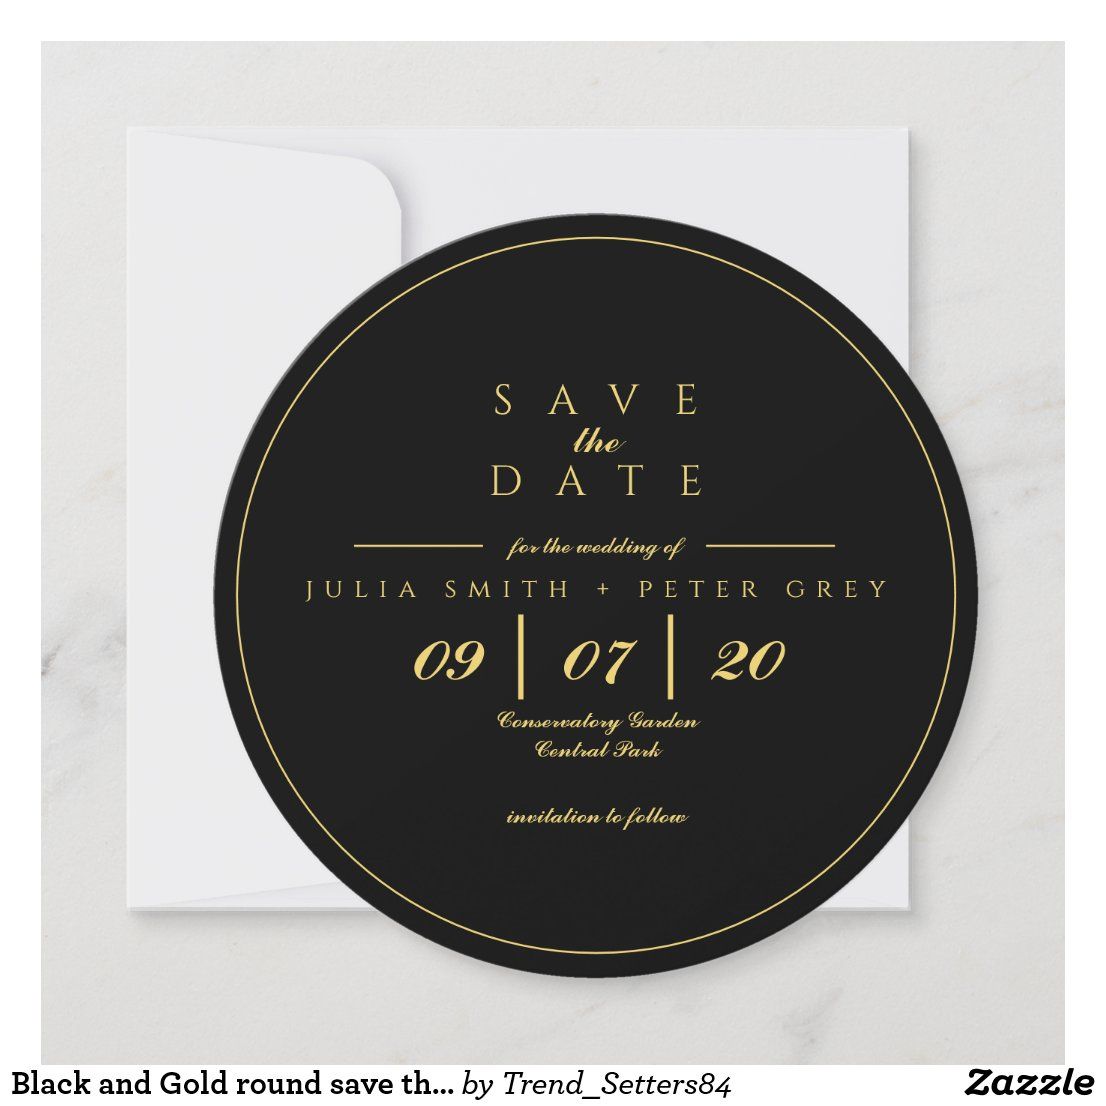 Black And Gold Round Save The Date Invitation | Zazzle | Save The Date  Invitations, Invitations, Modern Wedding Save The Dates